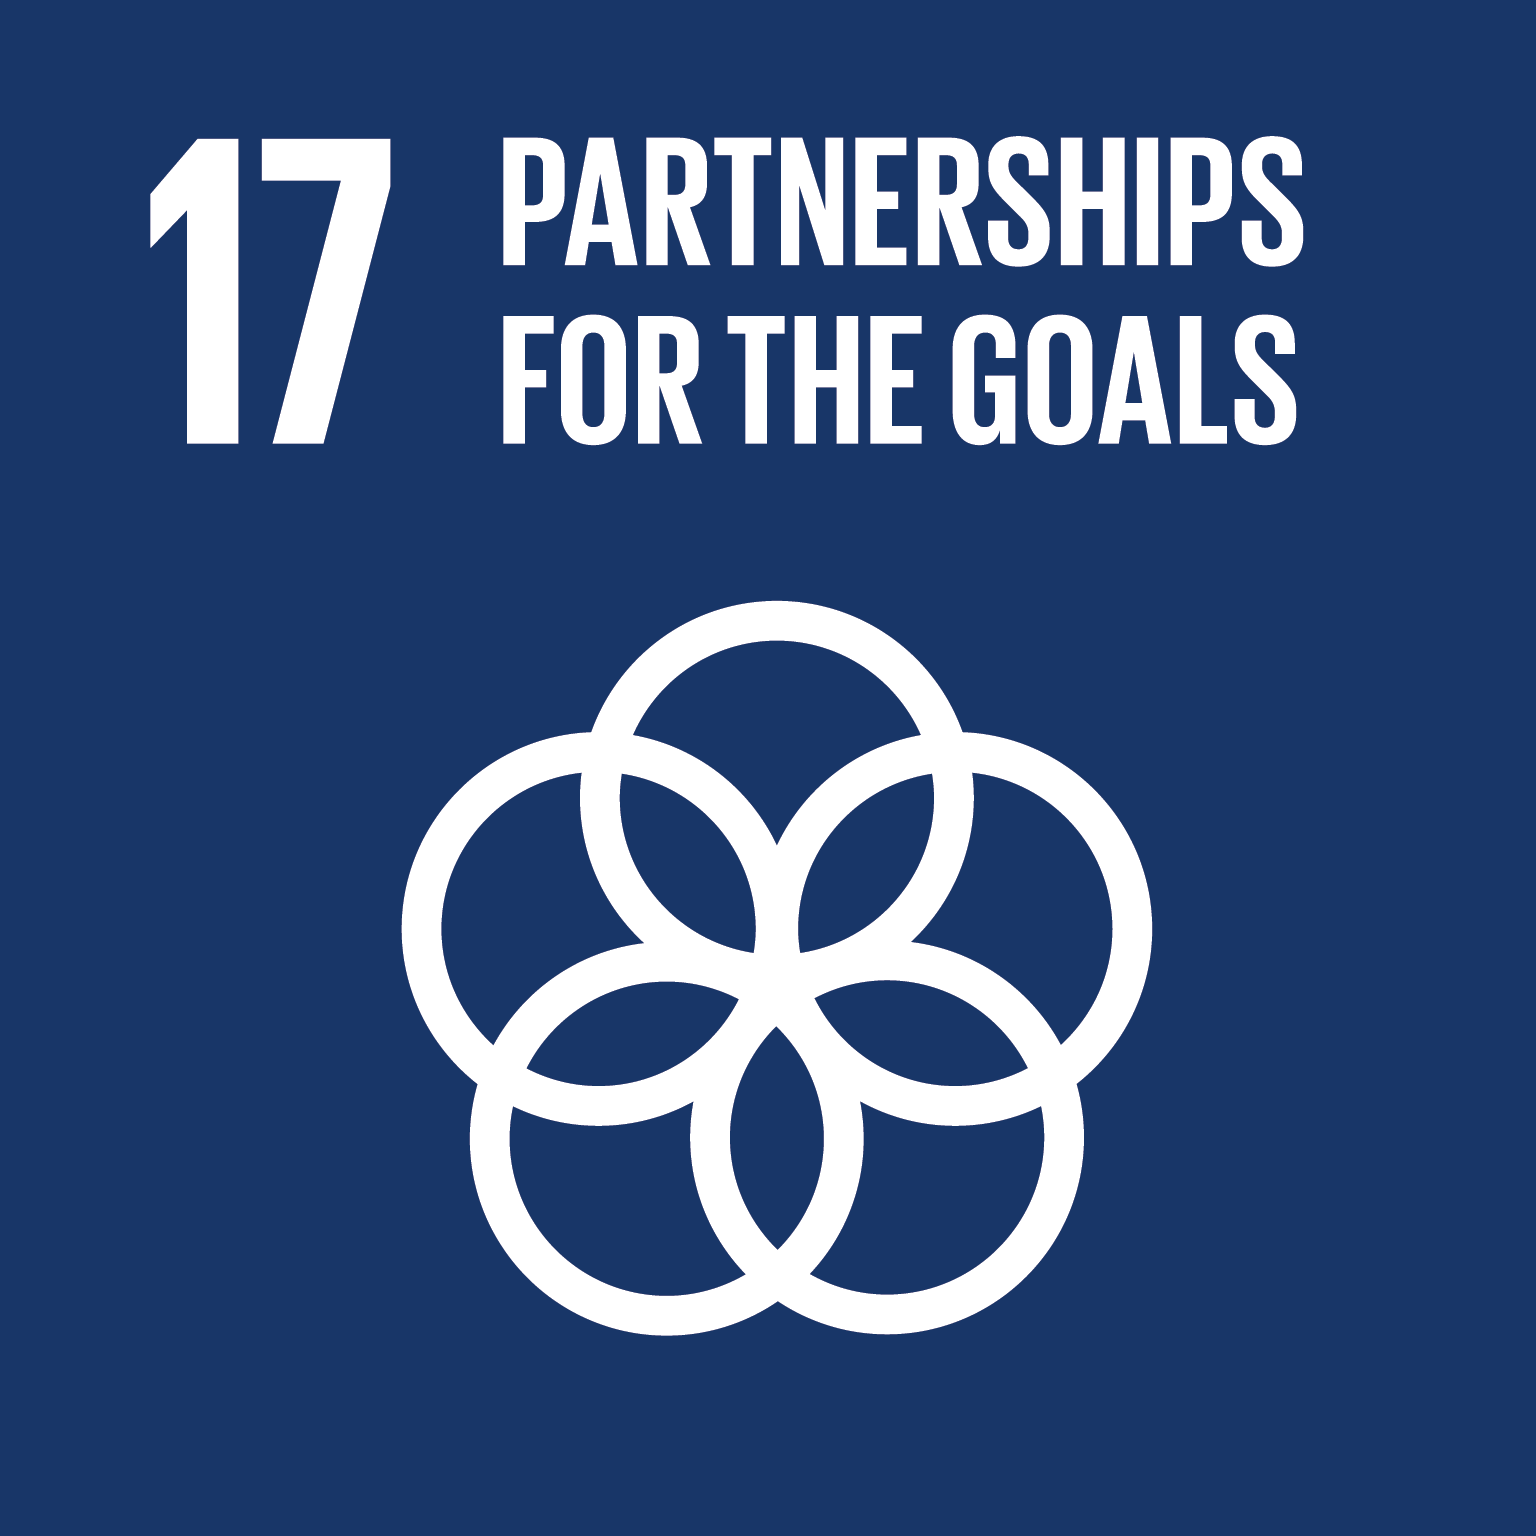 GOAL 17: Partnerships to achieve the Goal